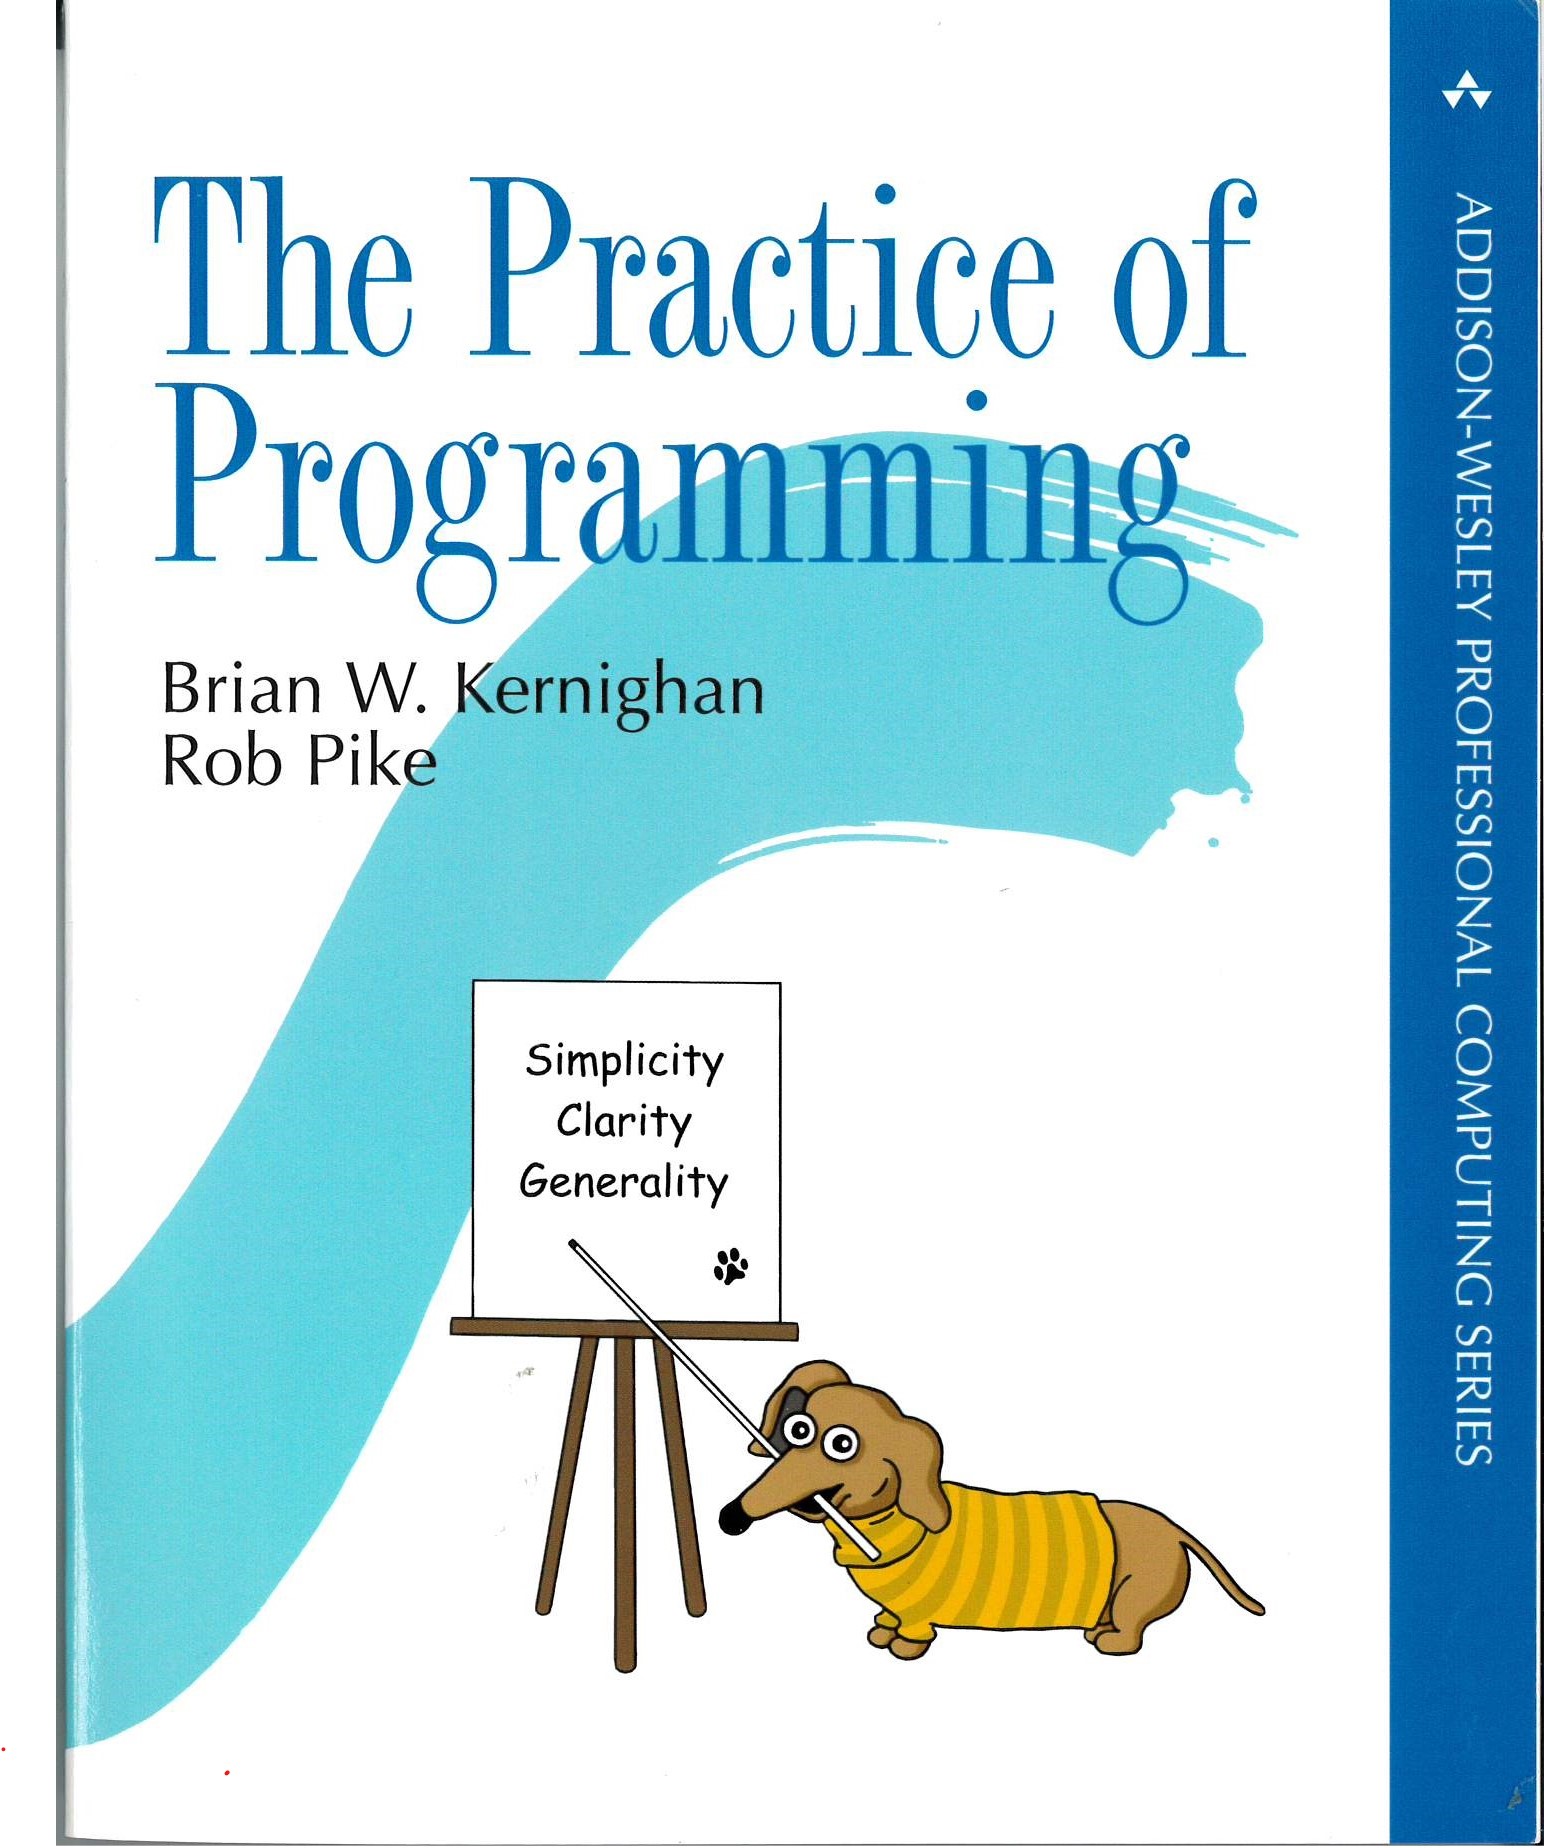 The practice of programming